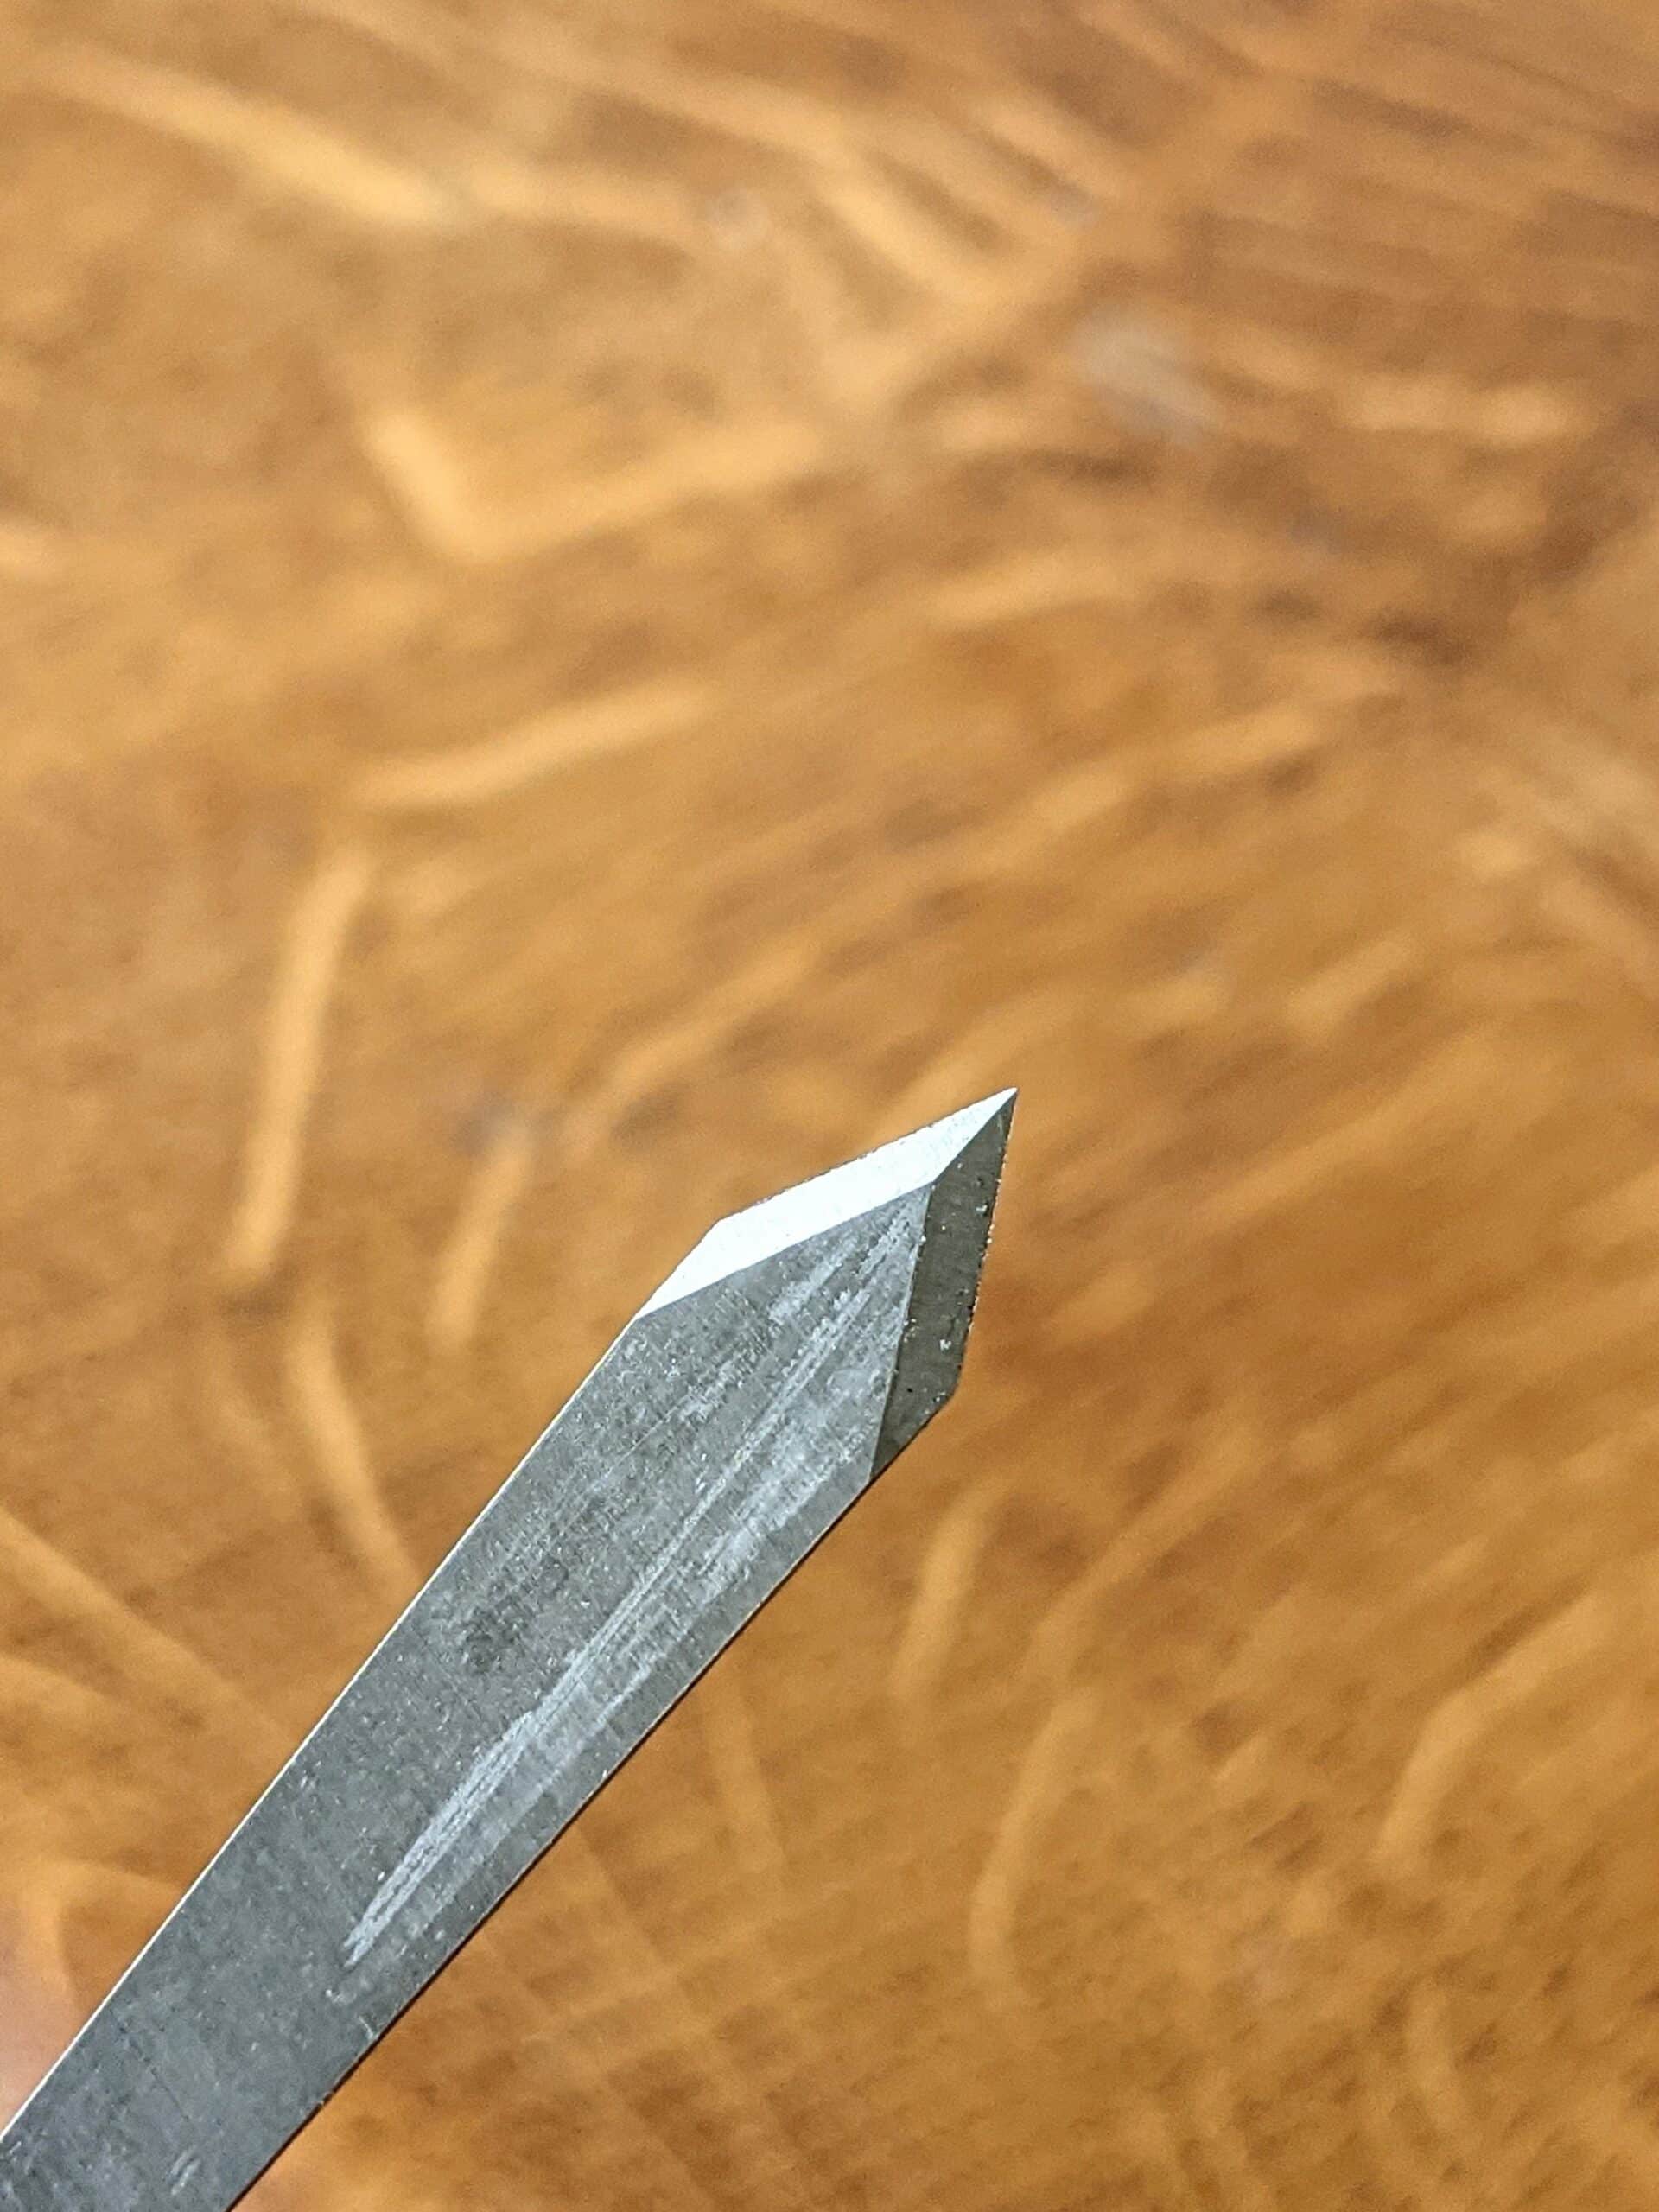 How to Make a Marking Knife 